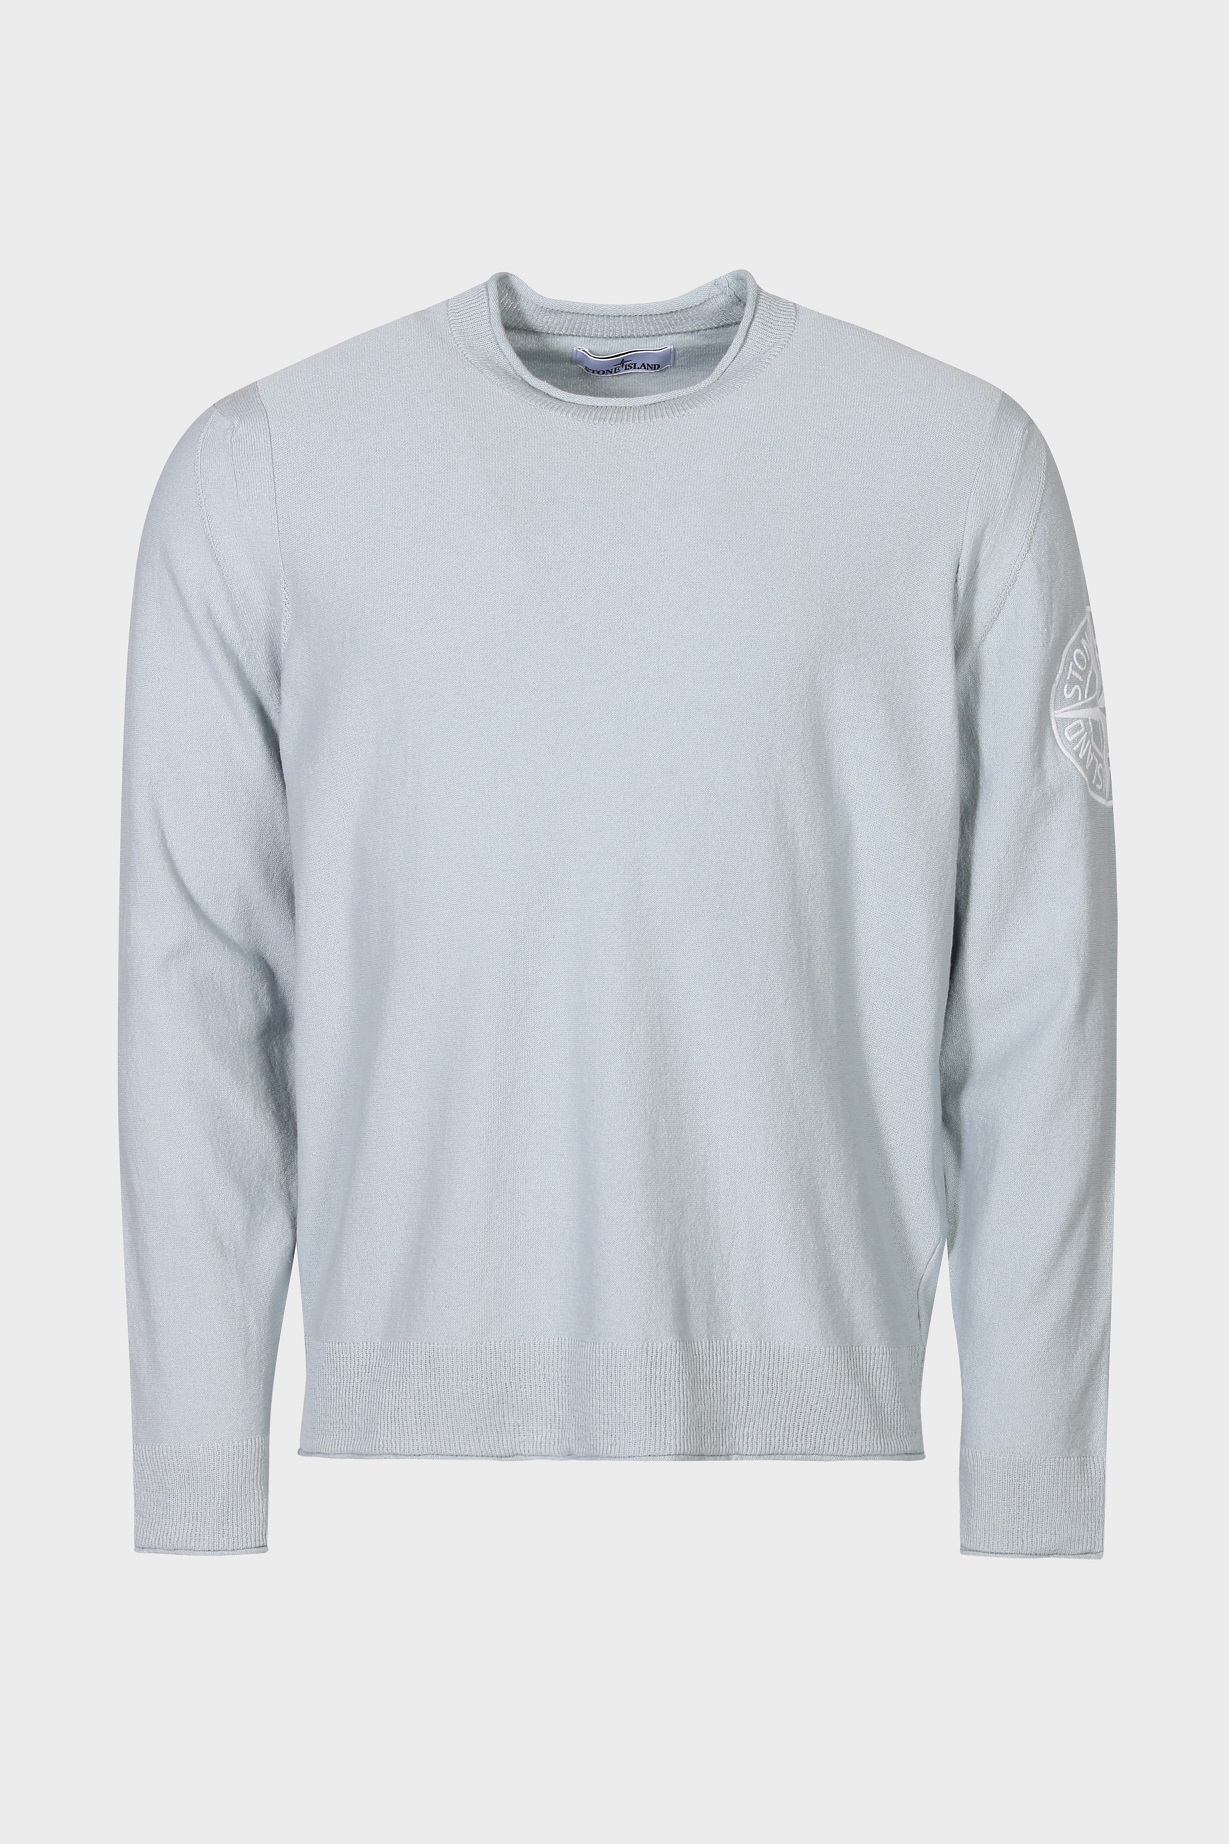 STONE ISLAND Cotton Knit Pullover in Sky Blue 3XL